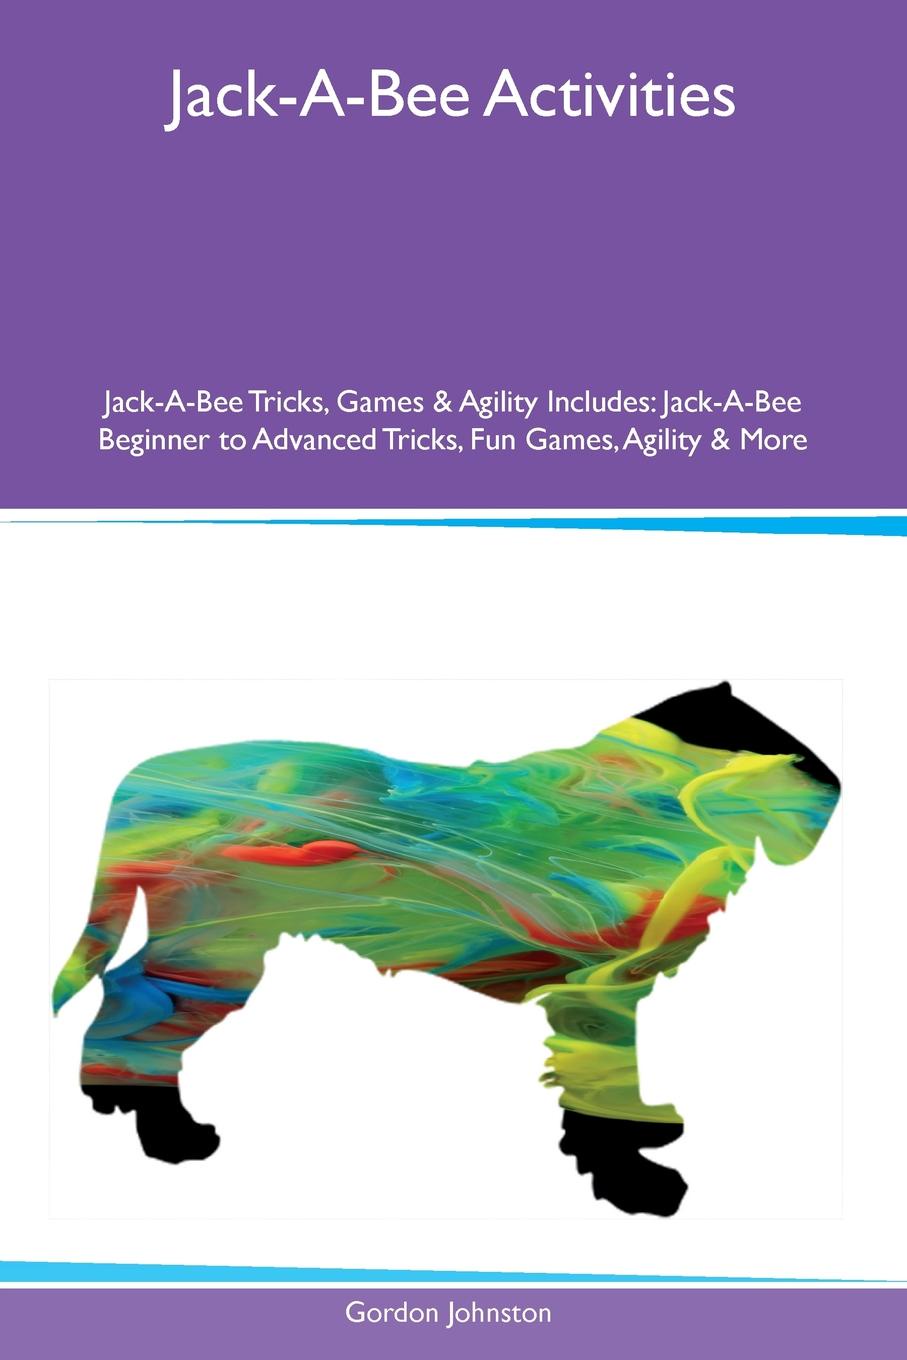 Jack-A-Bee Activities Jack-A-Bee Tricks, Games & Agility Includes. Jack-A-Bee Beginner to Advanced Tricks, Fun Games, Agility & More